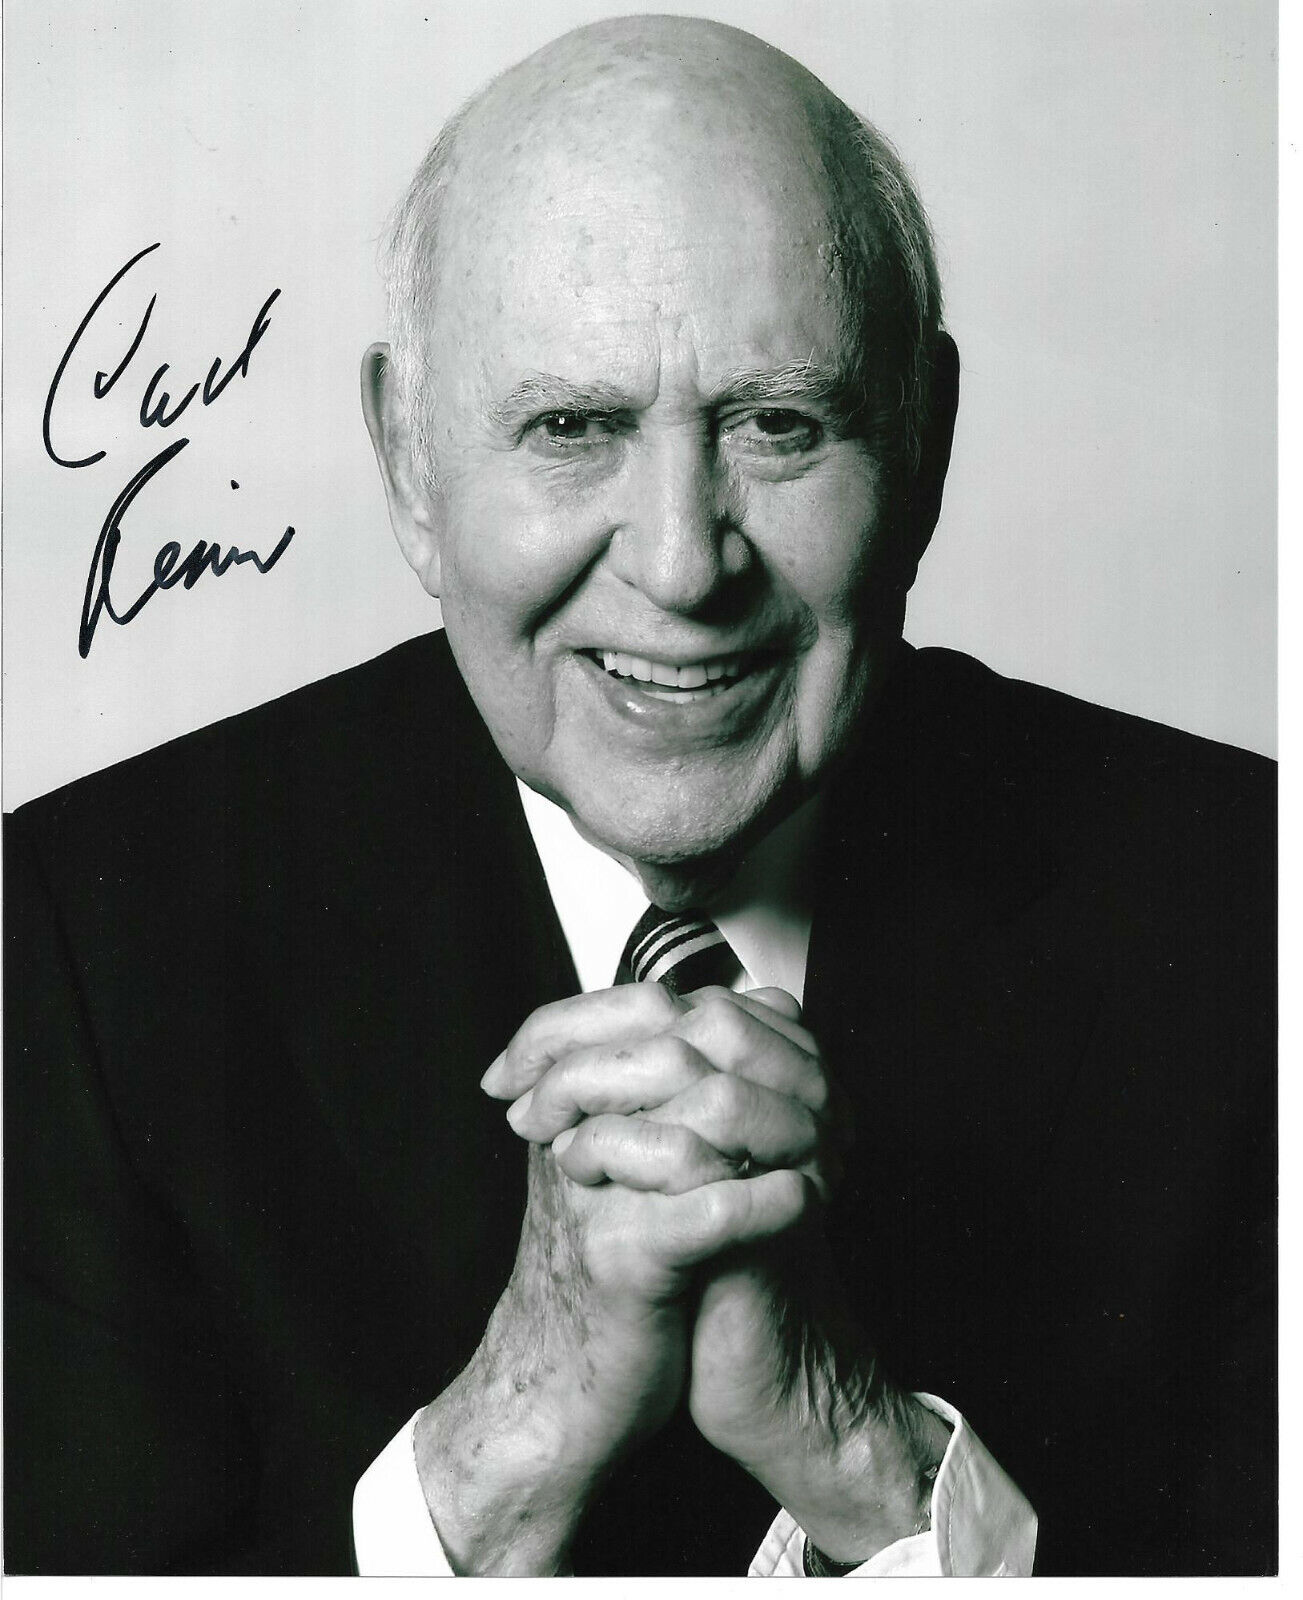 Carl Reiner Authentic Signed 8x10 Photo Poster painting Autographed, Actor, Comedian